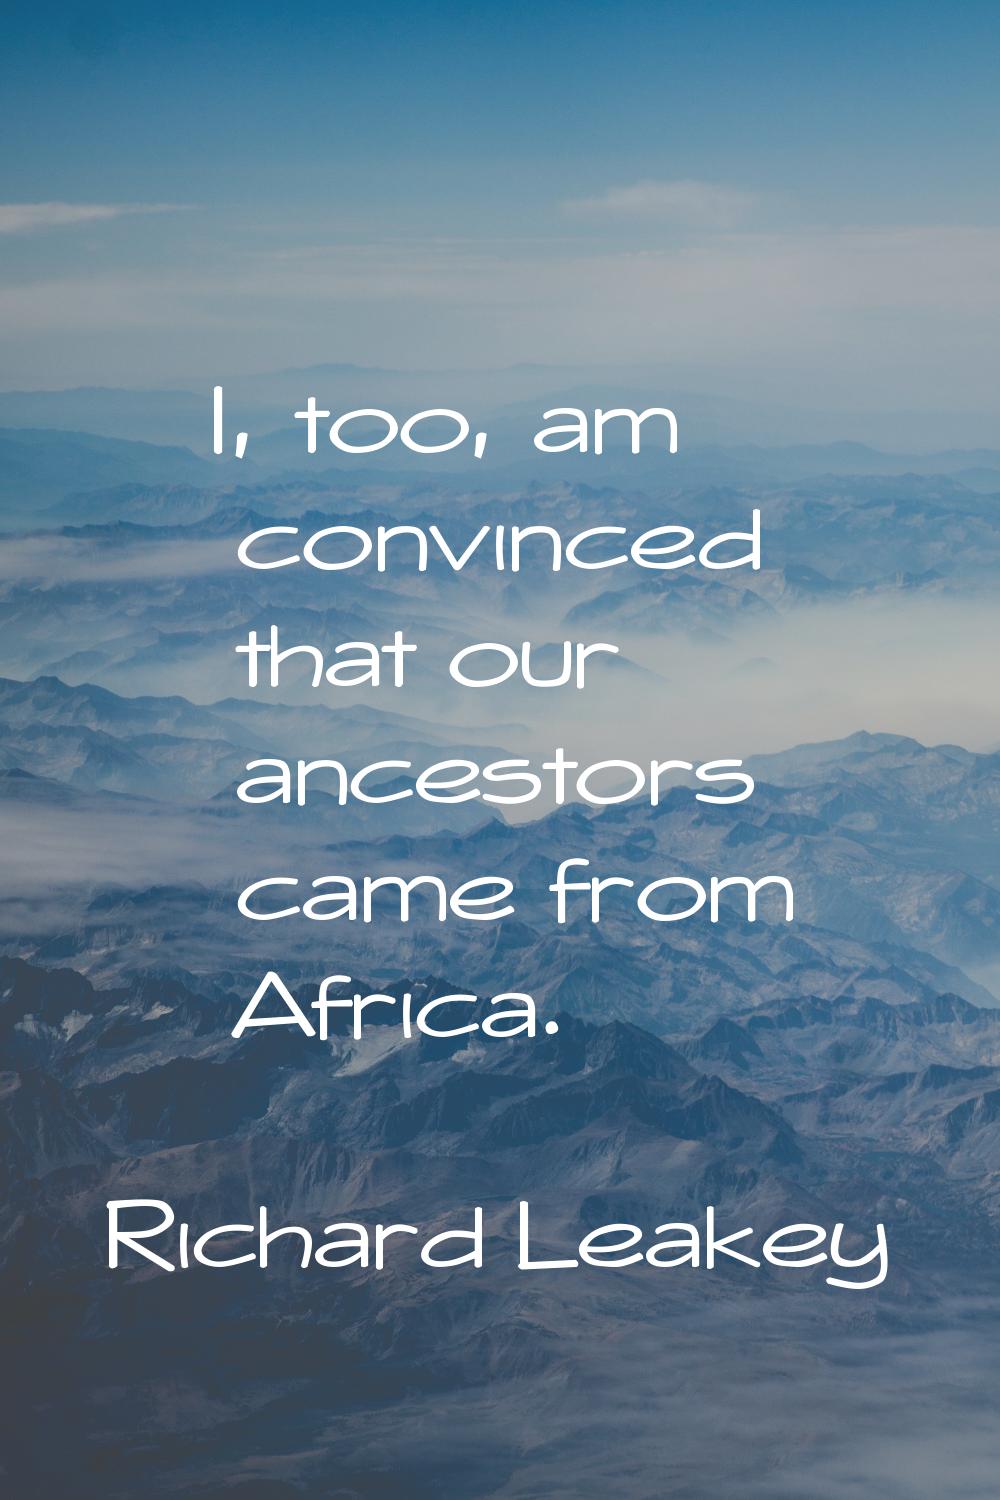 I, too, am convinced that our ancestors came from Africa.